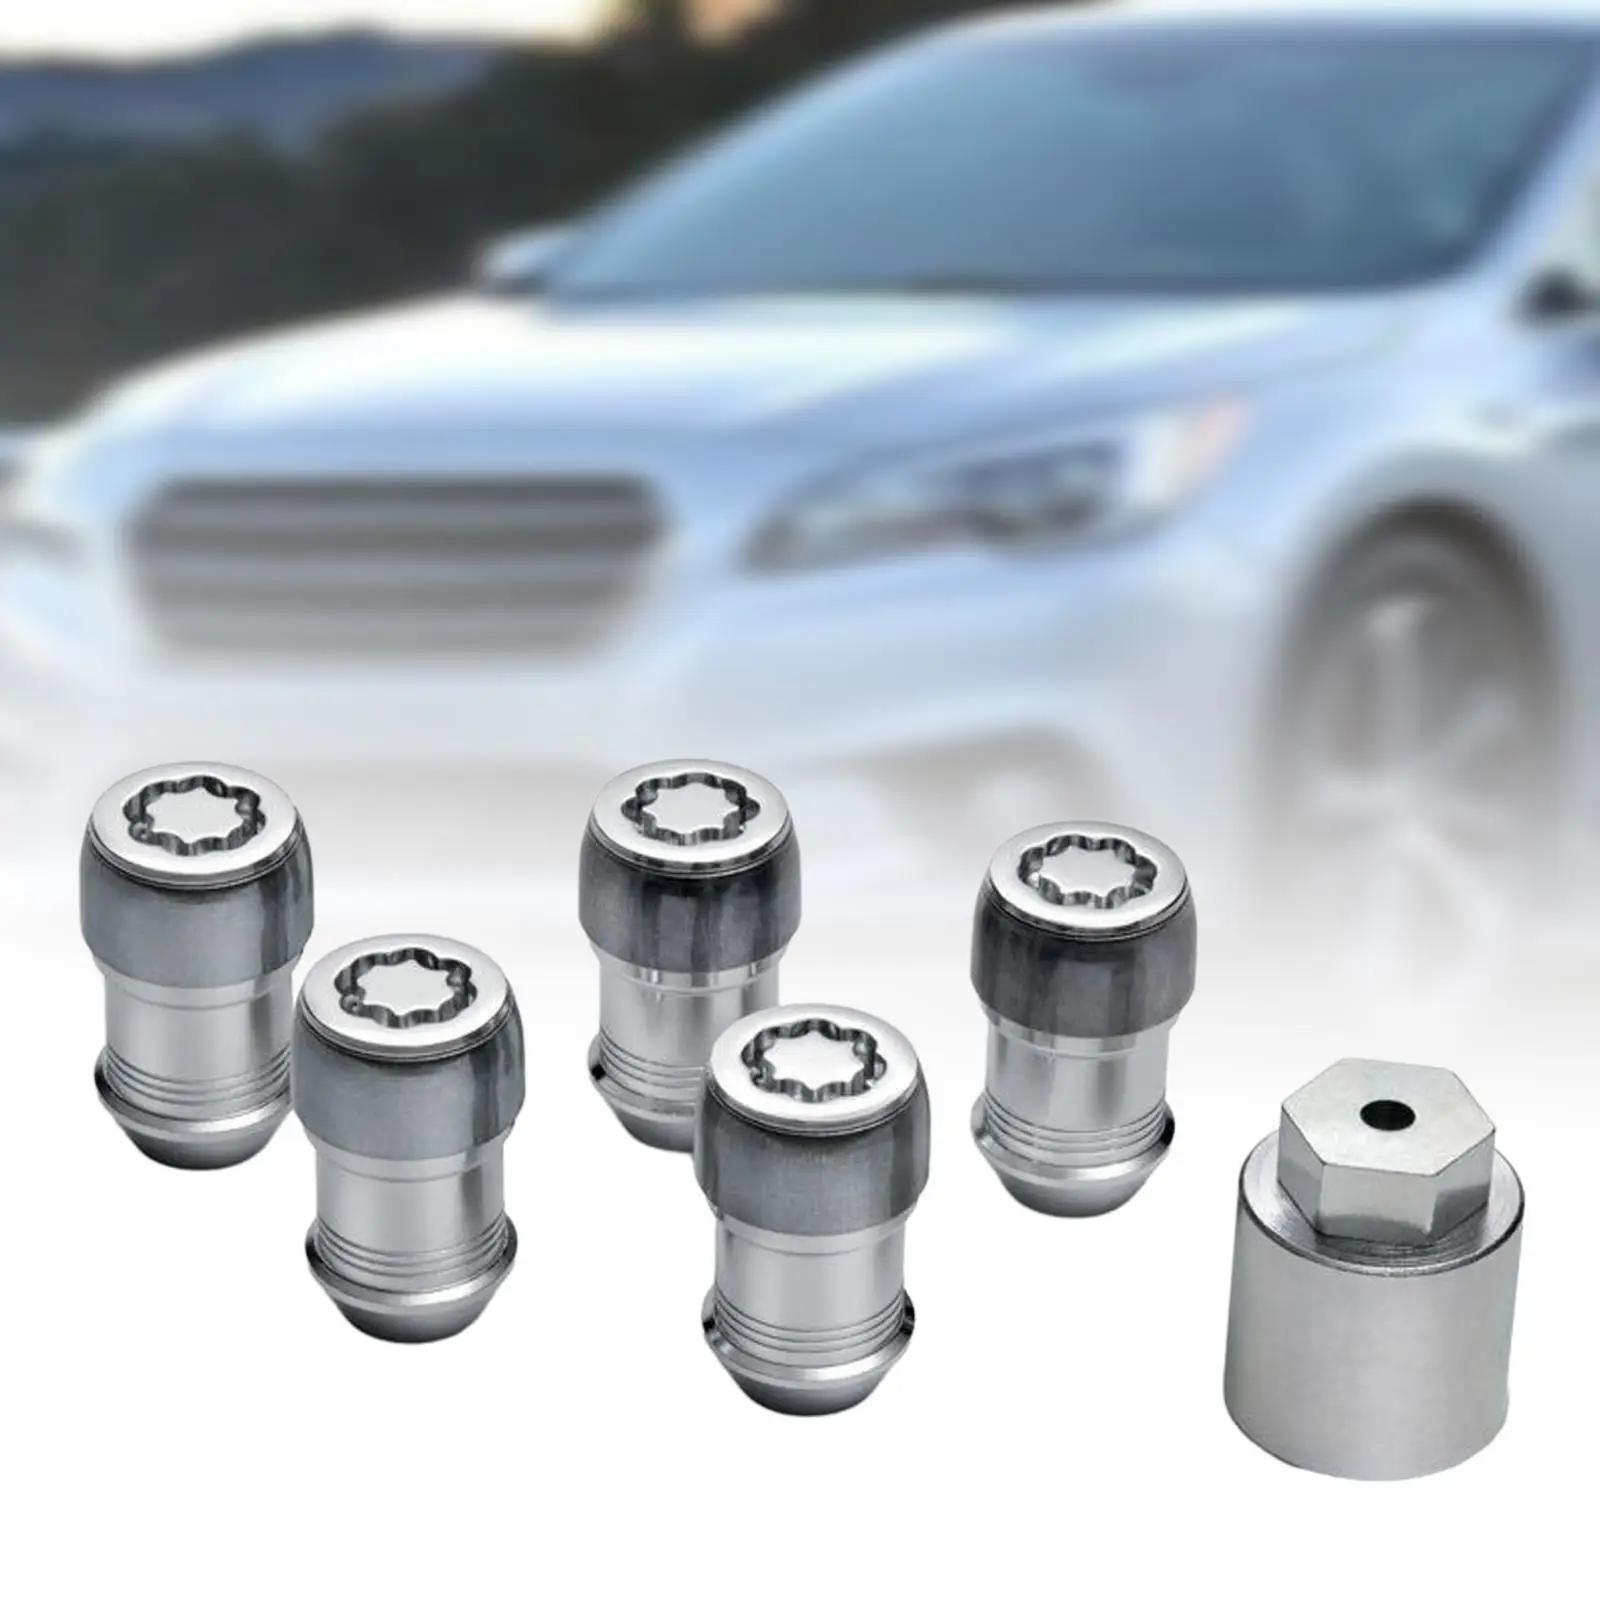 82215711 Wheel Lock Kit /High Performance/ Premium /Alloy /Spare Parts Durable Replaces Car Accessories